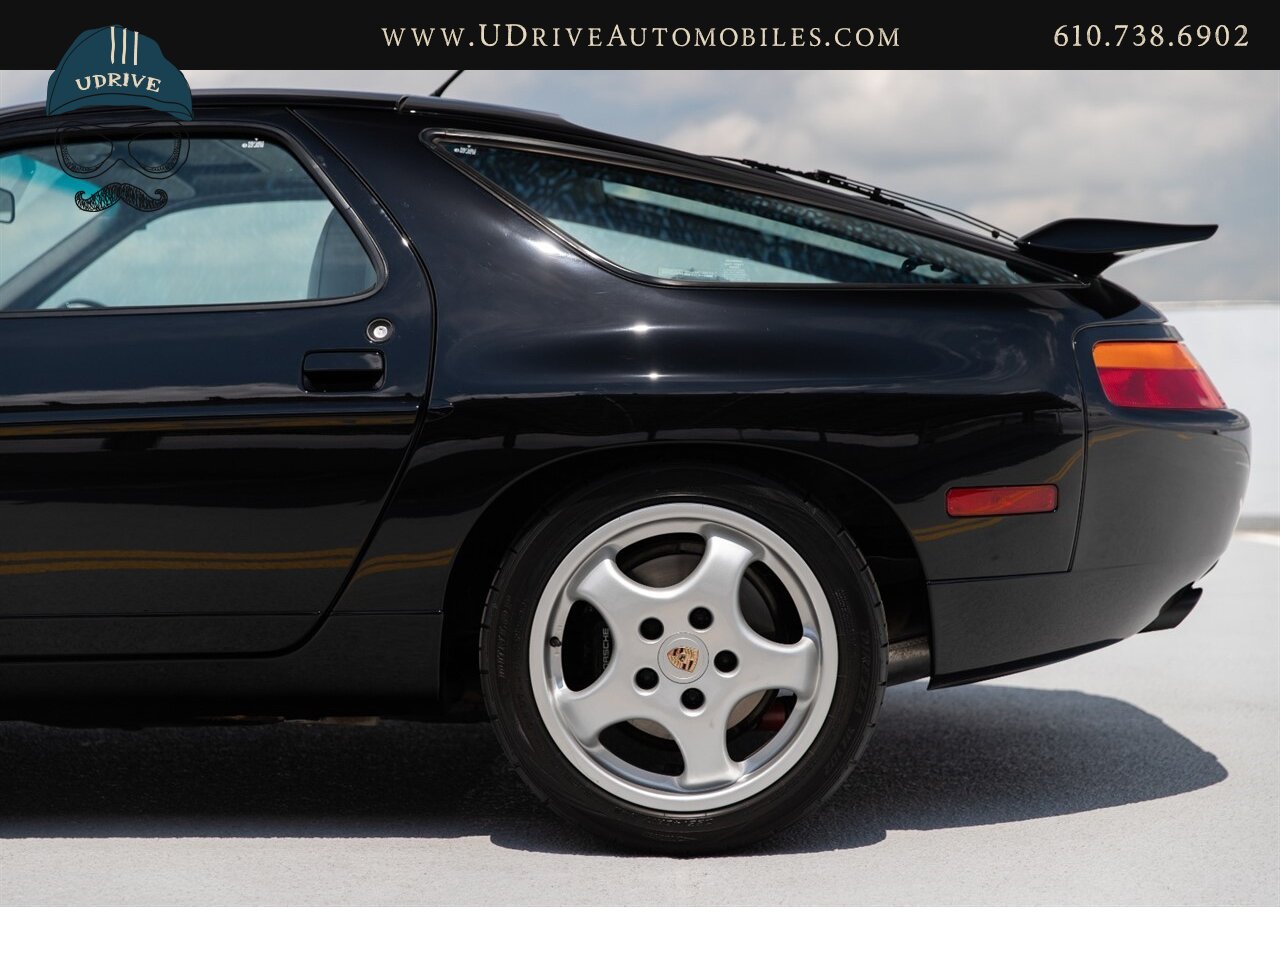 1993 Porsche 928 GTS Ultra Rare 5 Speed Service History  Collector Grade Example - Photo 24 - West Chester, PA 19382